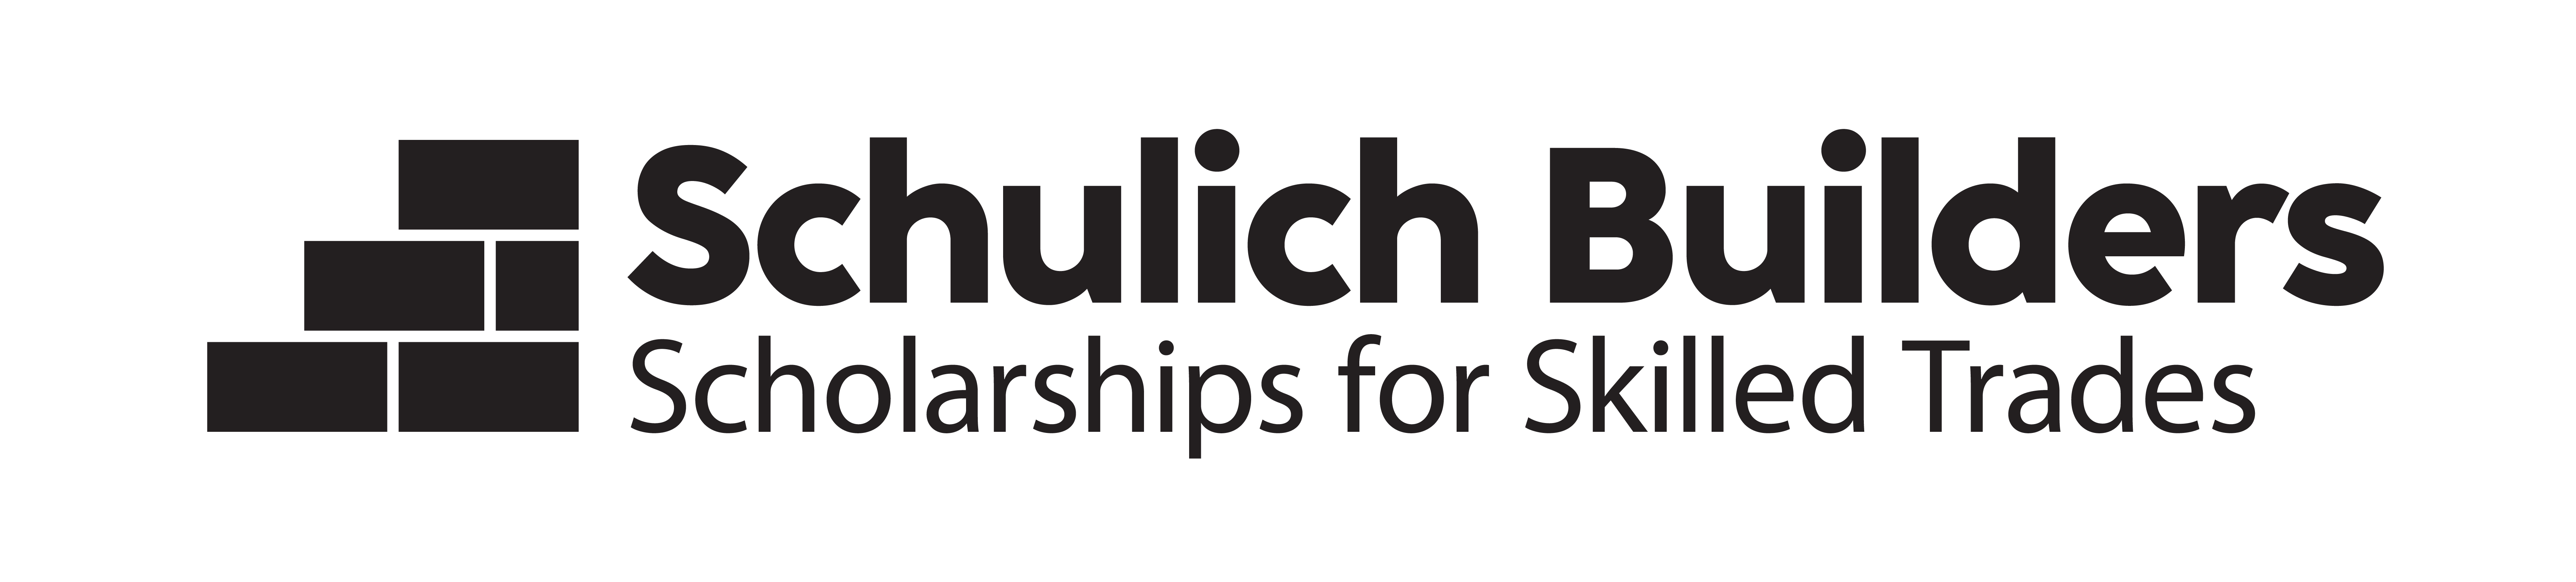 Schulich Builders Scholarships for Skilled Trades